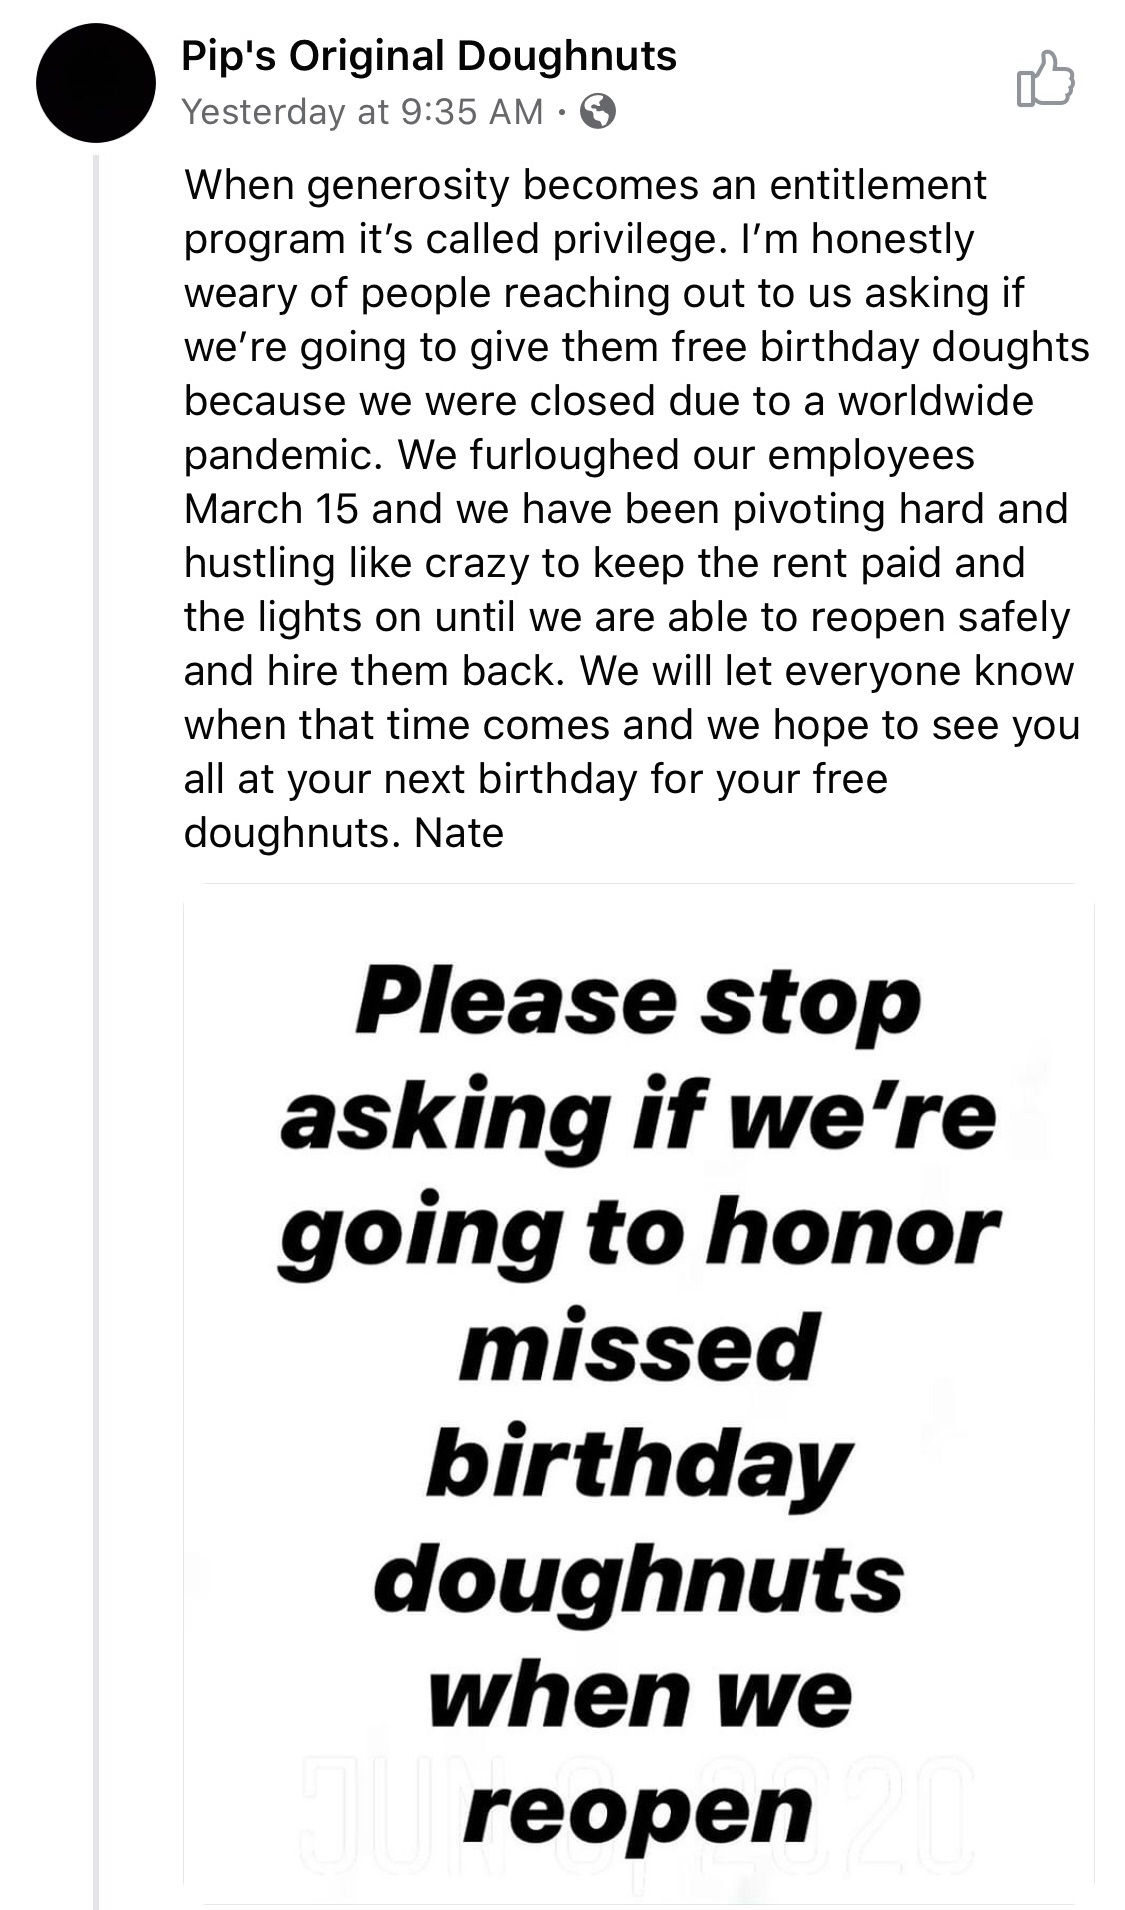 document - Pip's Original Doughnuts Yesterday at When generosity becomes an entitlement program it's called privilege. I'm honestly weary of people reaching out to us asking if we're going to give them free birthday doughts because we were closed due to a